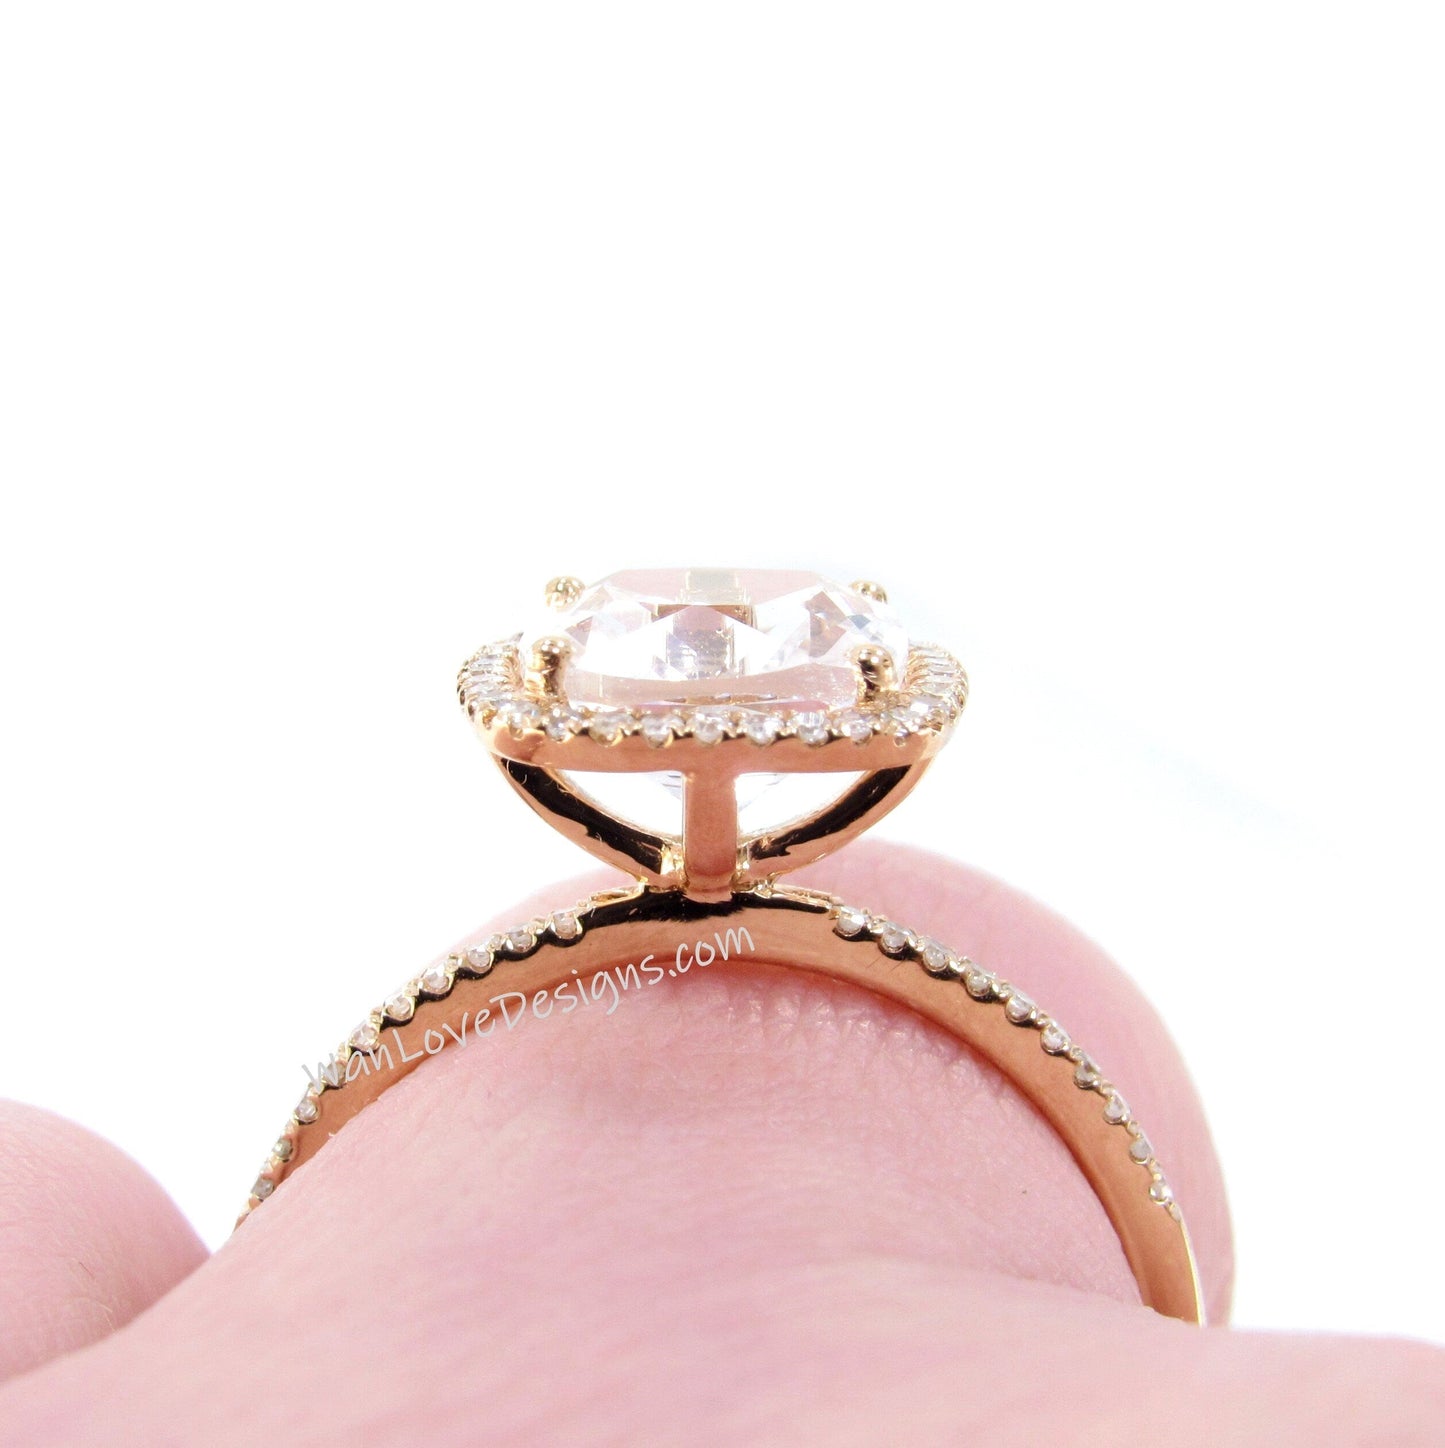 18K Solid Gold Diamond Halo Ring/3CT Cushion Cut Center/ White Sapphire Engagement Ring/ Wedding Ring/Anniversary Ring/Rose Gold Ring/Ready Wan Love Designs